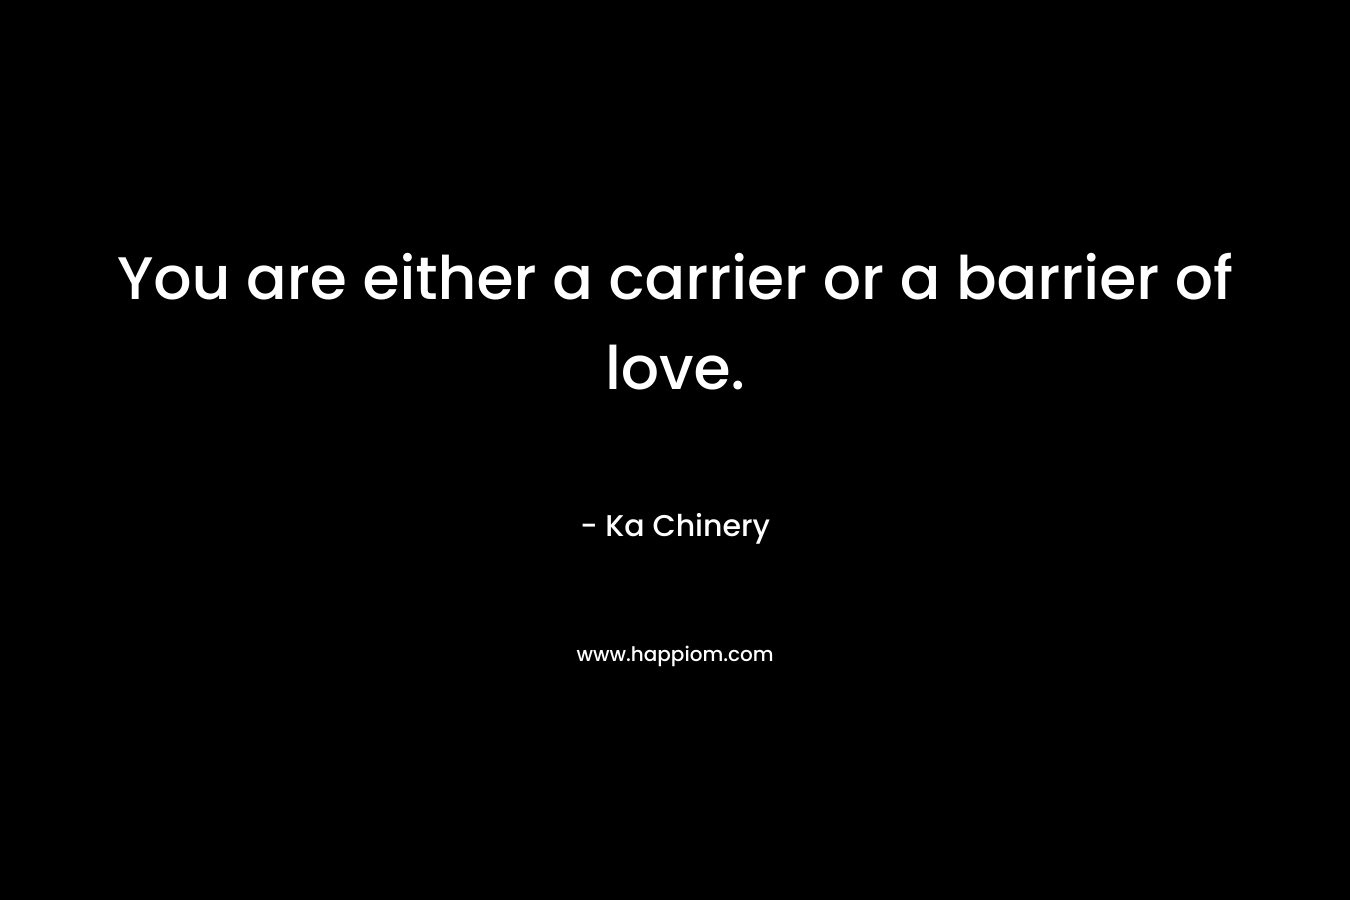 You are either a carrier or a barrier of love. – Ka Chinery